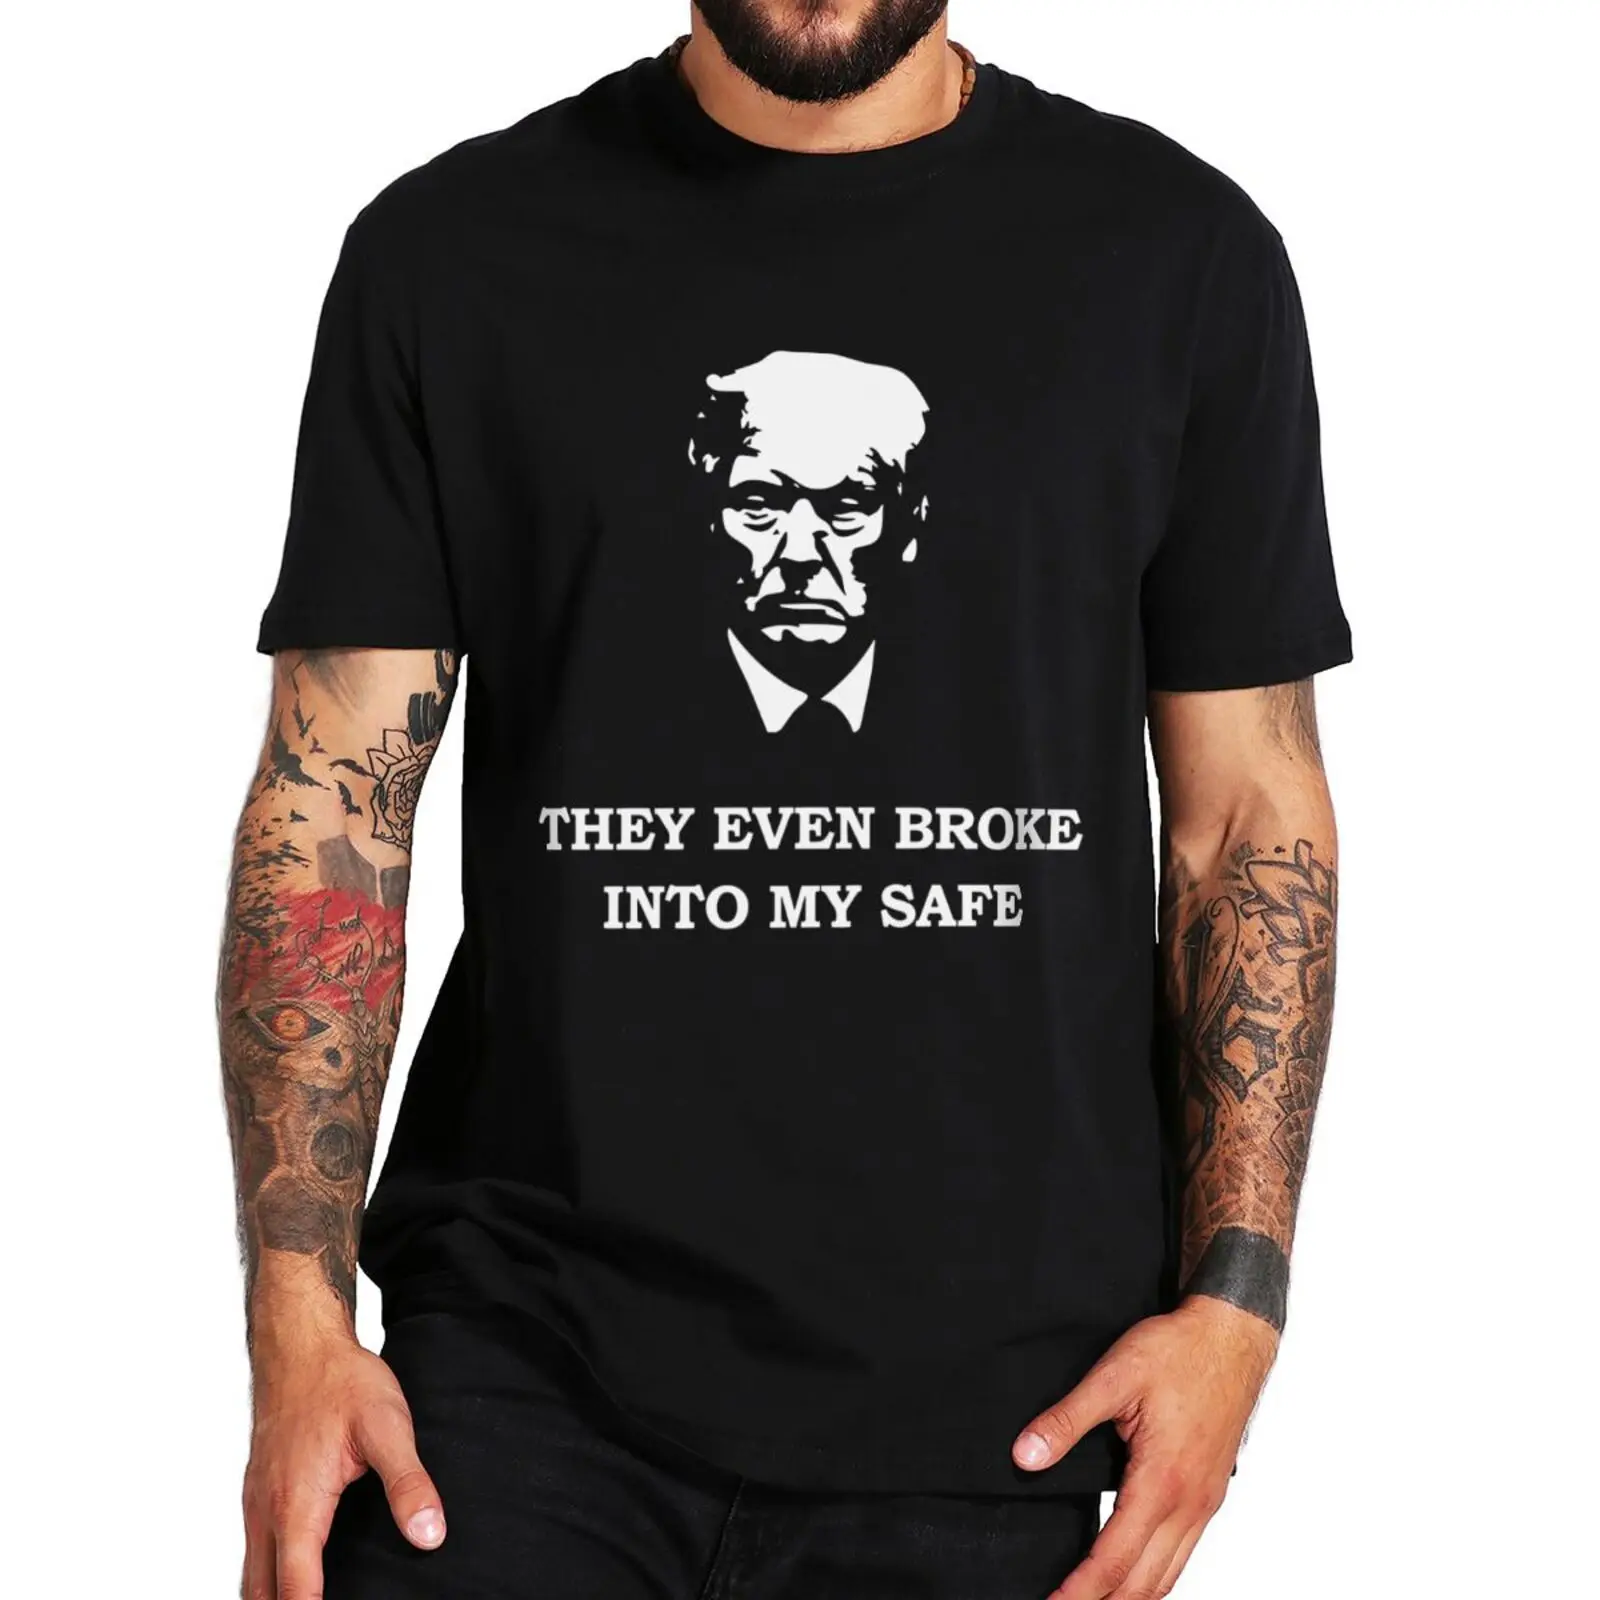 

Trump They Even Broken Into My Safe T Shirt 2022 Funny Meme Jokes Humor Tee Tops Summer 100% Cotton Unisex Casual T-shirts